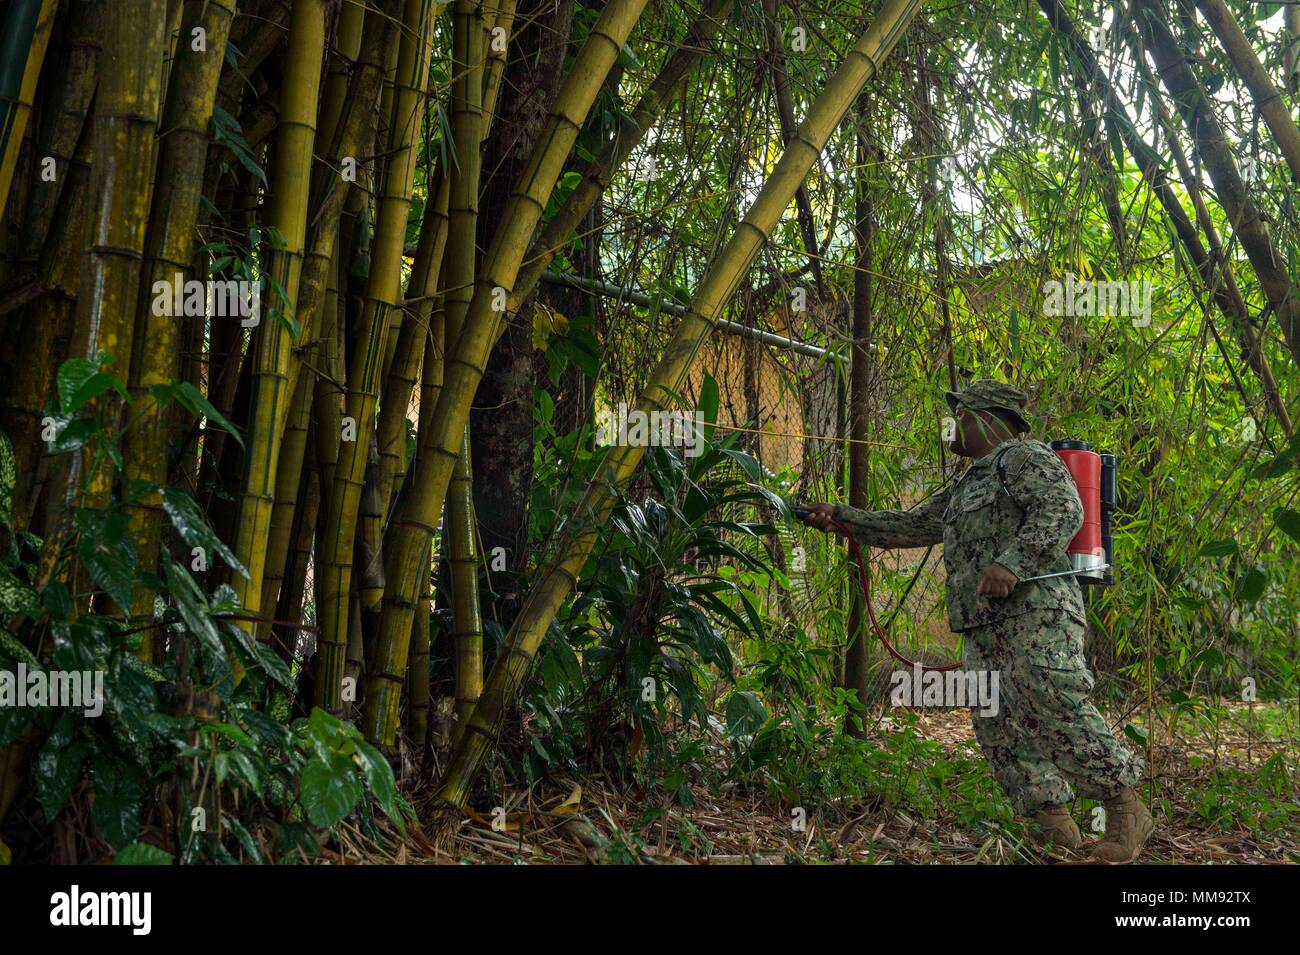 170918-N-YM856-0041 PUERTO BARRIOS, Guatemala (Sept. 18, 2017) Hospital Corpsman 1st Class Dominic Ladmirault, assigned to the Navy Entomology Center for Excellence, sprays insecticide at Centro De Atención Mis Años Dorados, a local nursing home, during Southern Partnership Station 17 (SPS 17). SPS 17 is a U.S. Navy deployment executed by U.S. Naval Forces Southern Command/U.S. 4th Fleet, focused on subject matter expert exchanges with partner nation militaries and security forces in Central and South America. (U.S. Navy Combat Camera photo by Mass Communication Specialist 2nd Class Brittney C Stock Photo